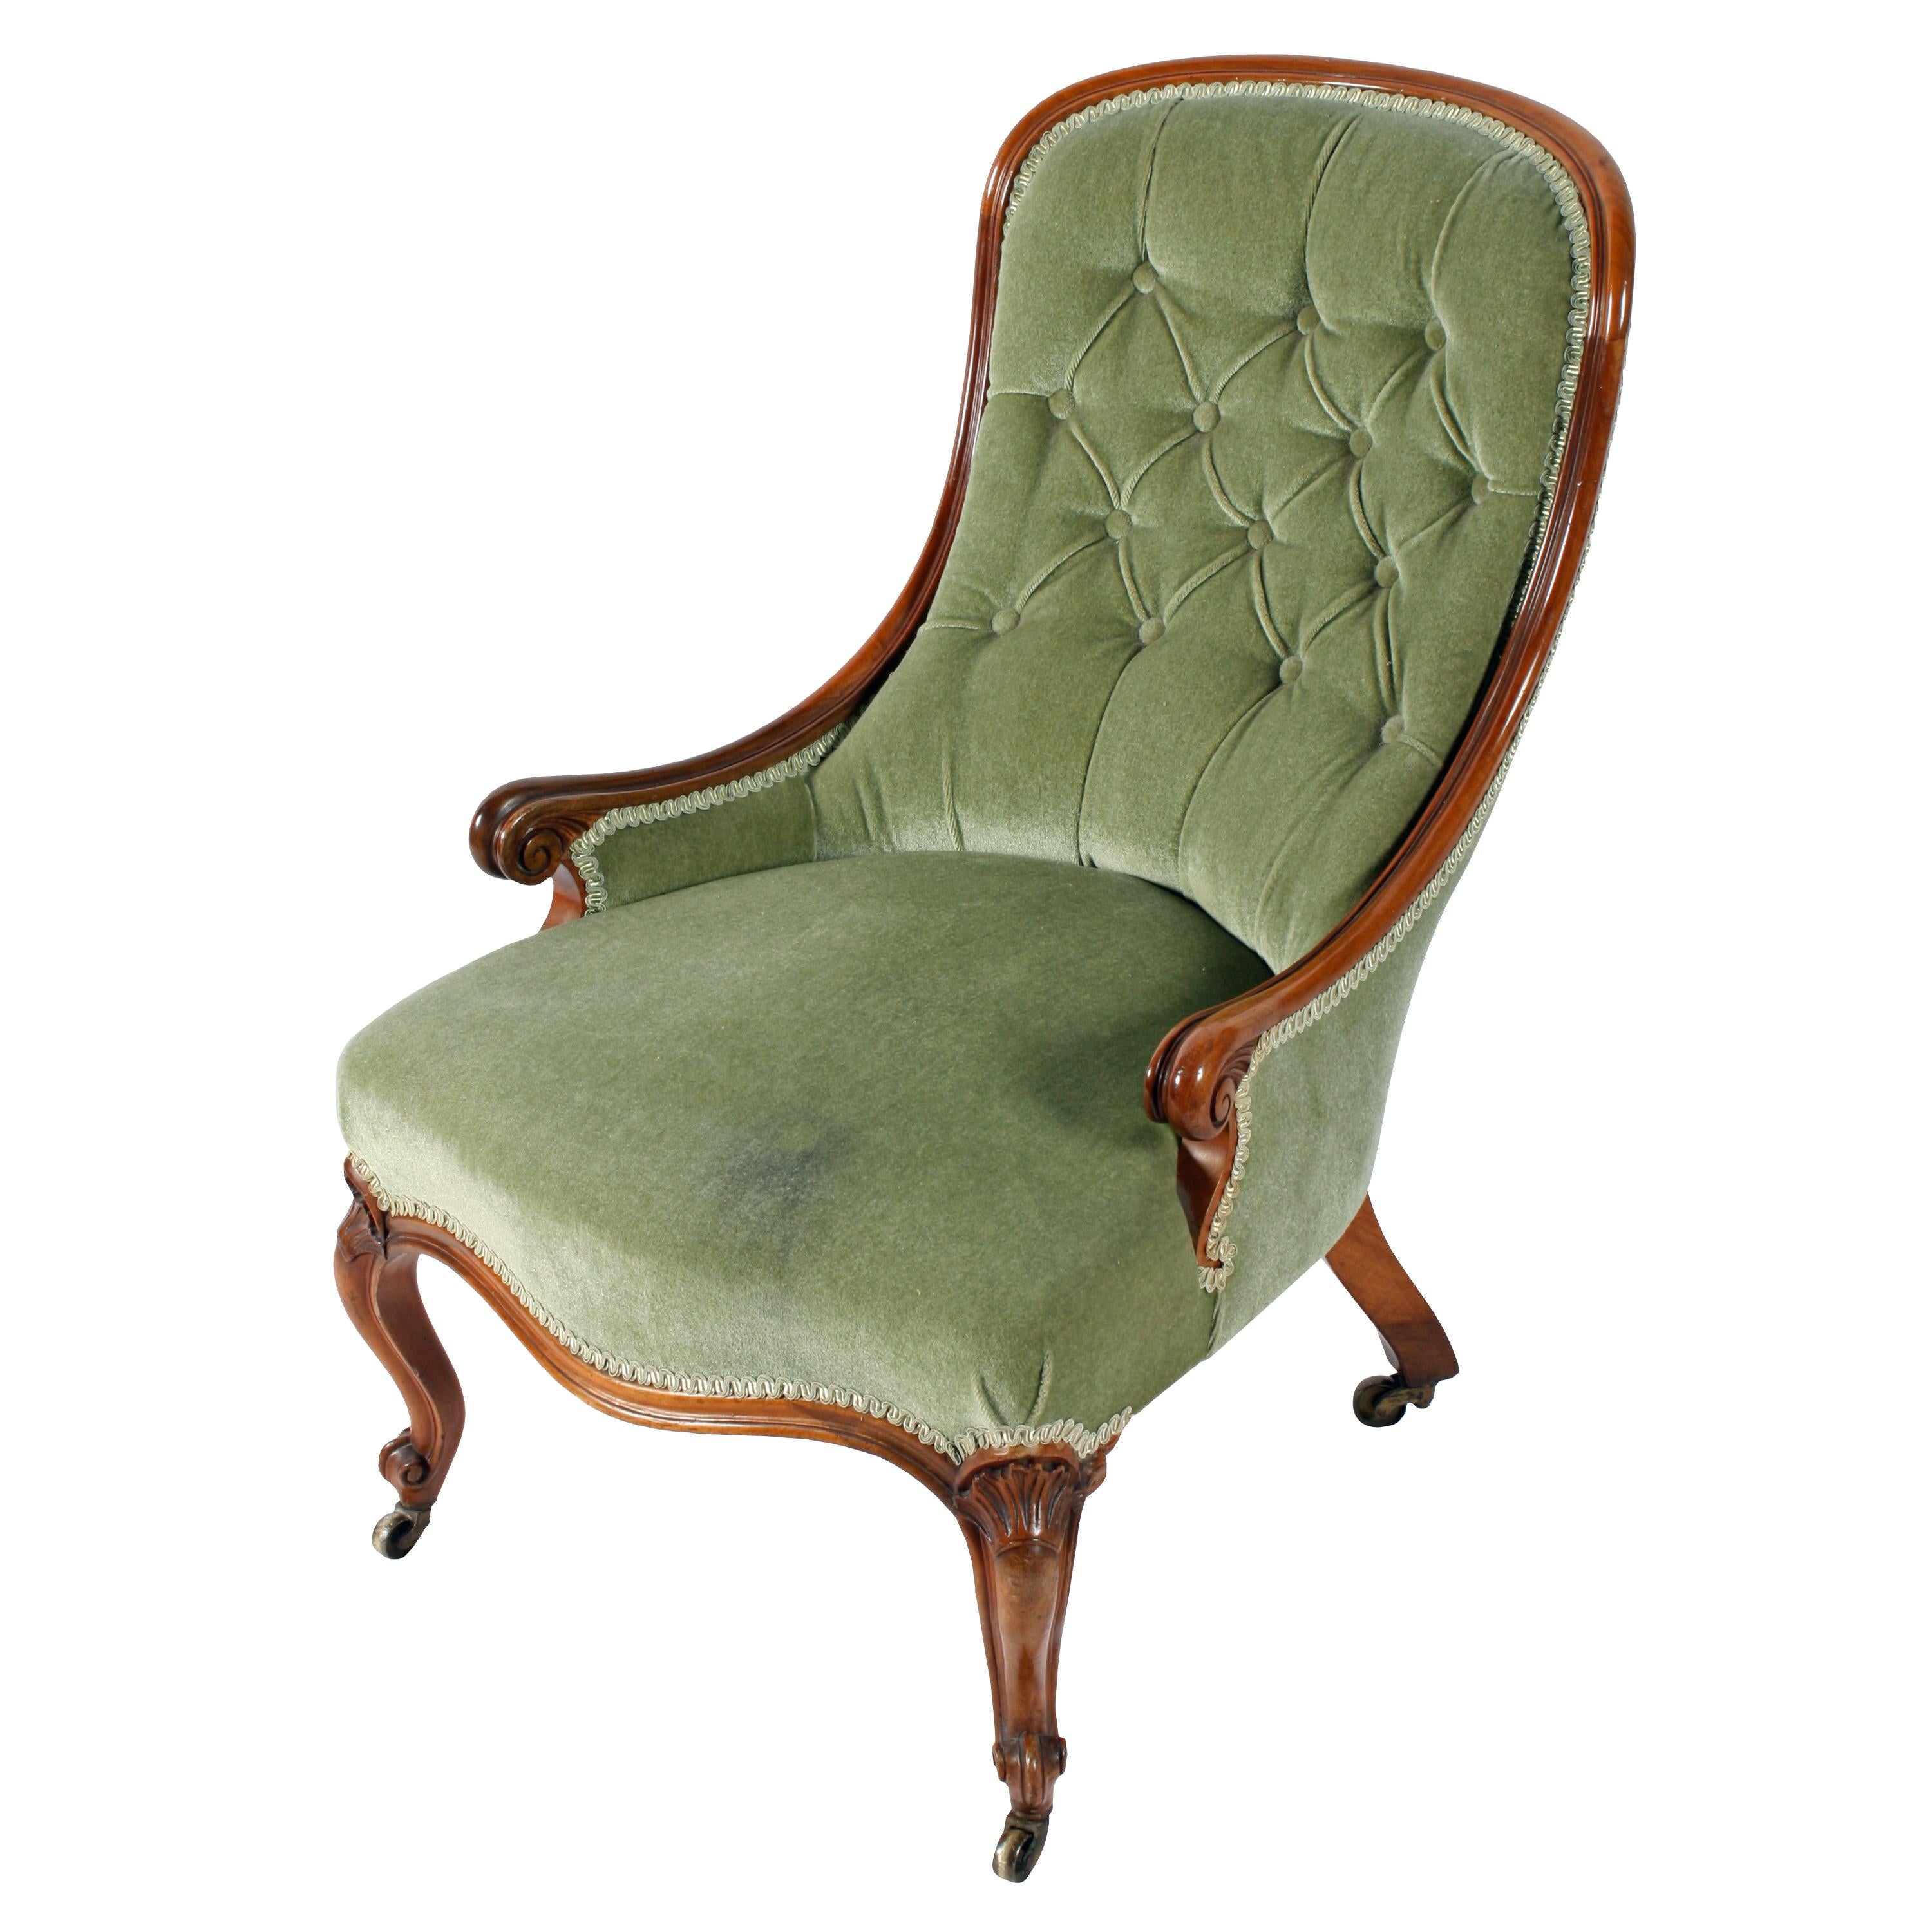 A fine quality 19th century Victorian walnut slipper shaped easy chair.

The chair has a molded walnut frame with low arms that end in a scroll.

The chair has a serpentine shaped front with cabriole legs that have scroll toes and carved